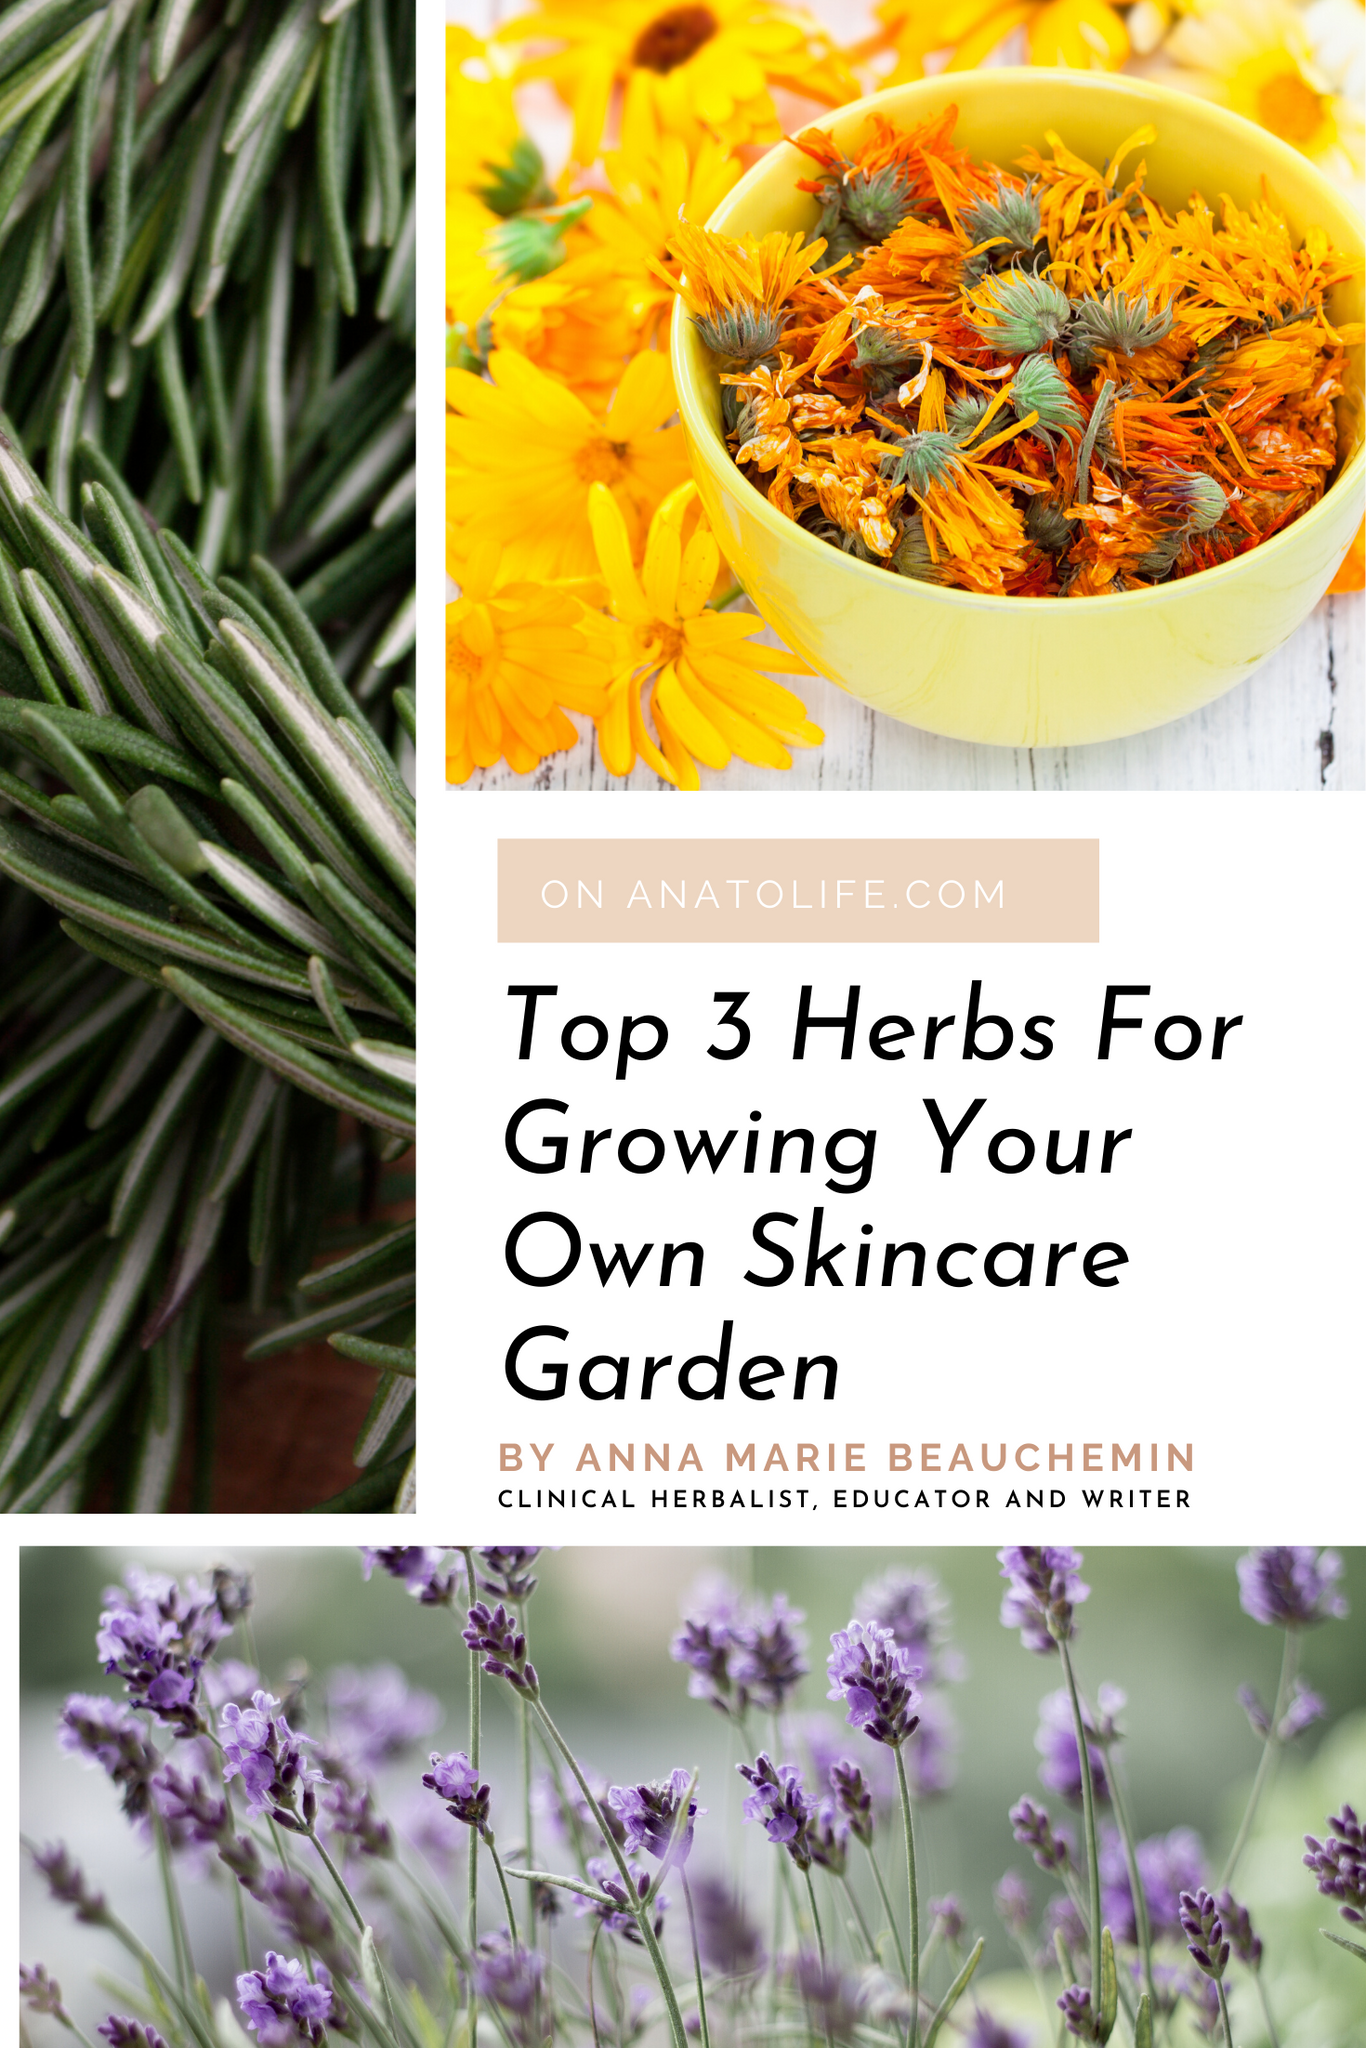 Top 3 Herbs For Growing Your Own Skincare Garden